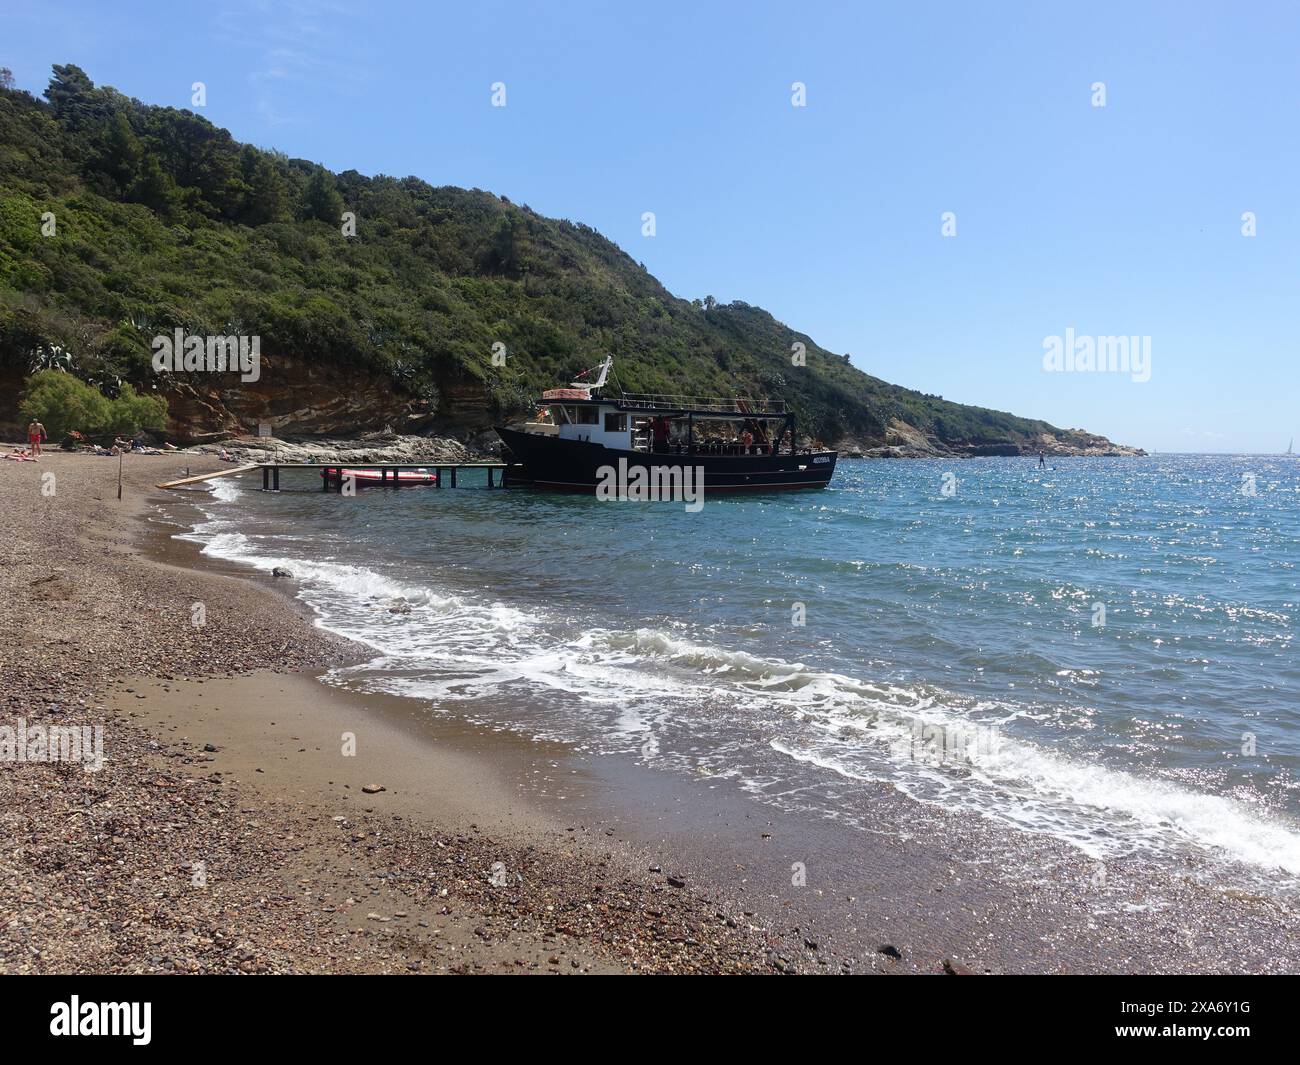 A shot of a boat on the shore near mountains and a water surface Stock Photo